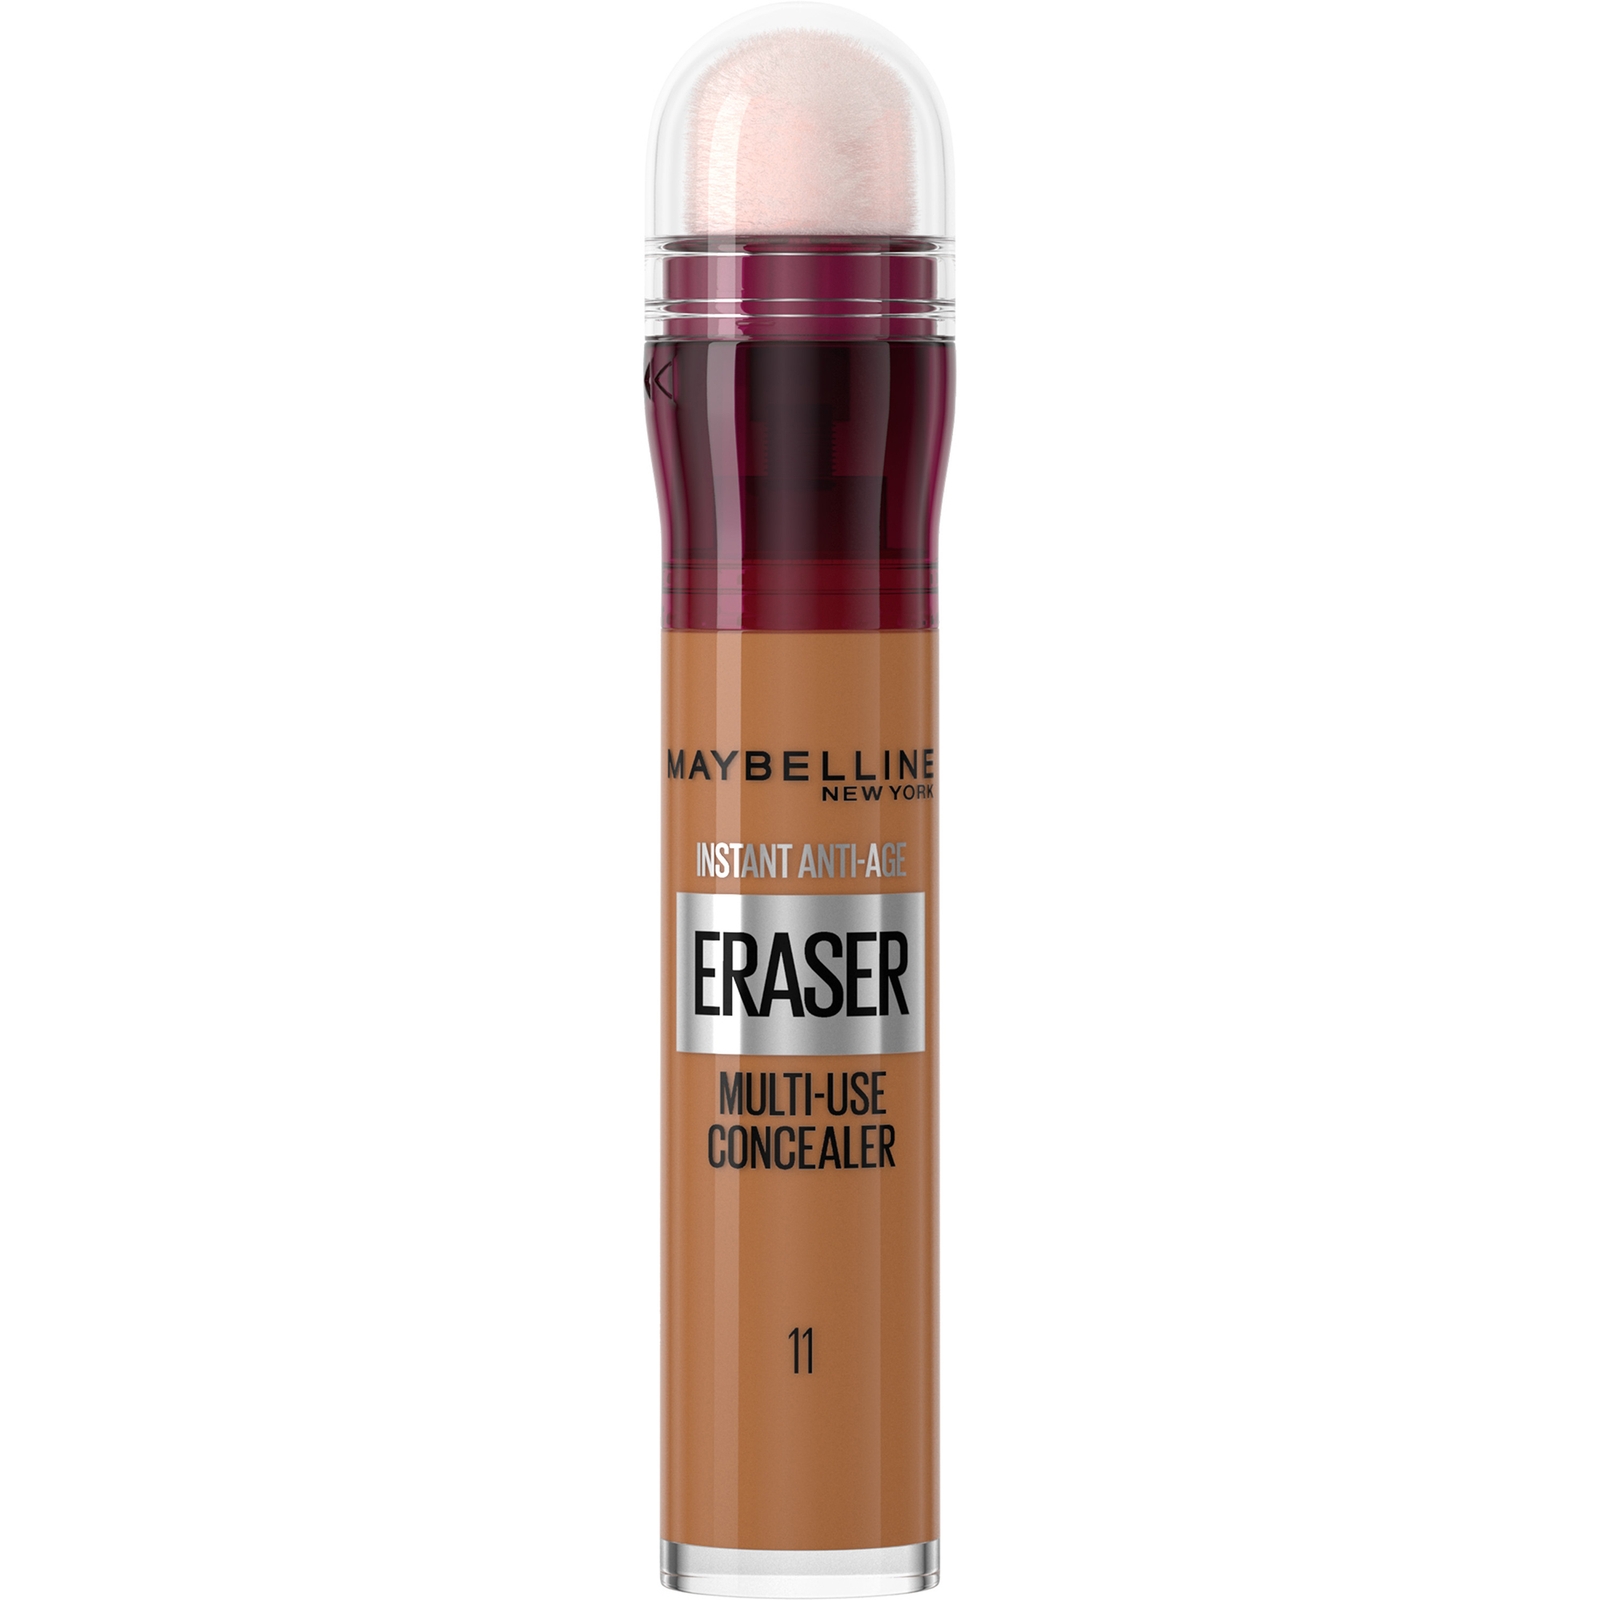 Maybelline Instant Anti Age Eraser Concealer 6.8ml (Various Shades) - 11 Tan